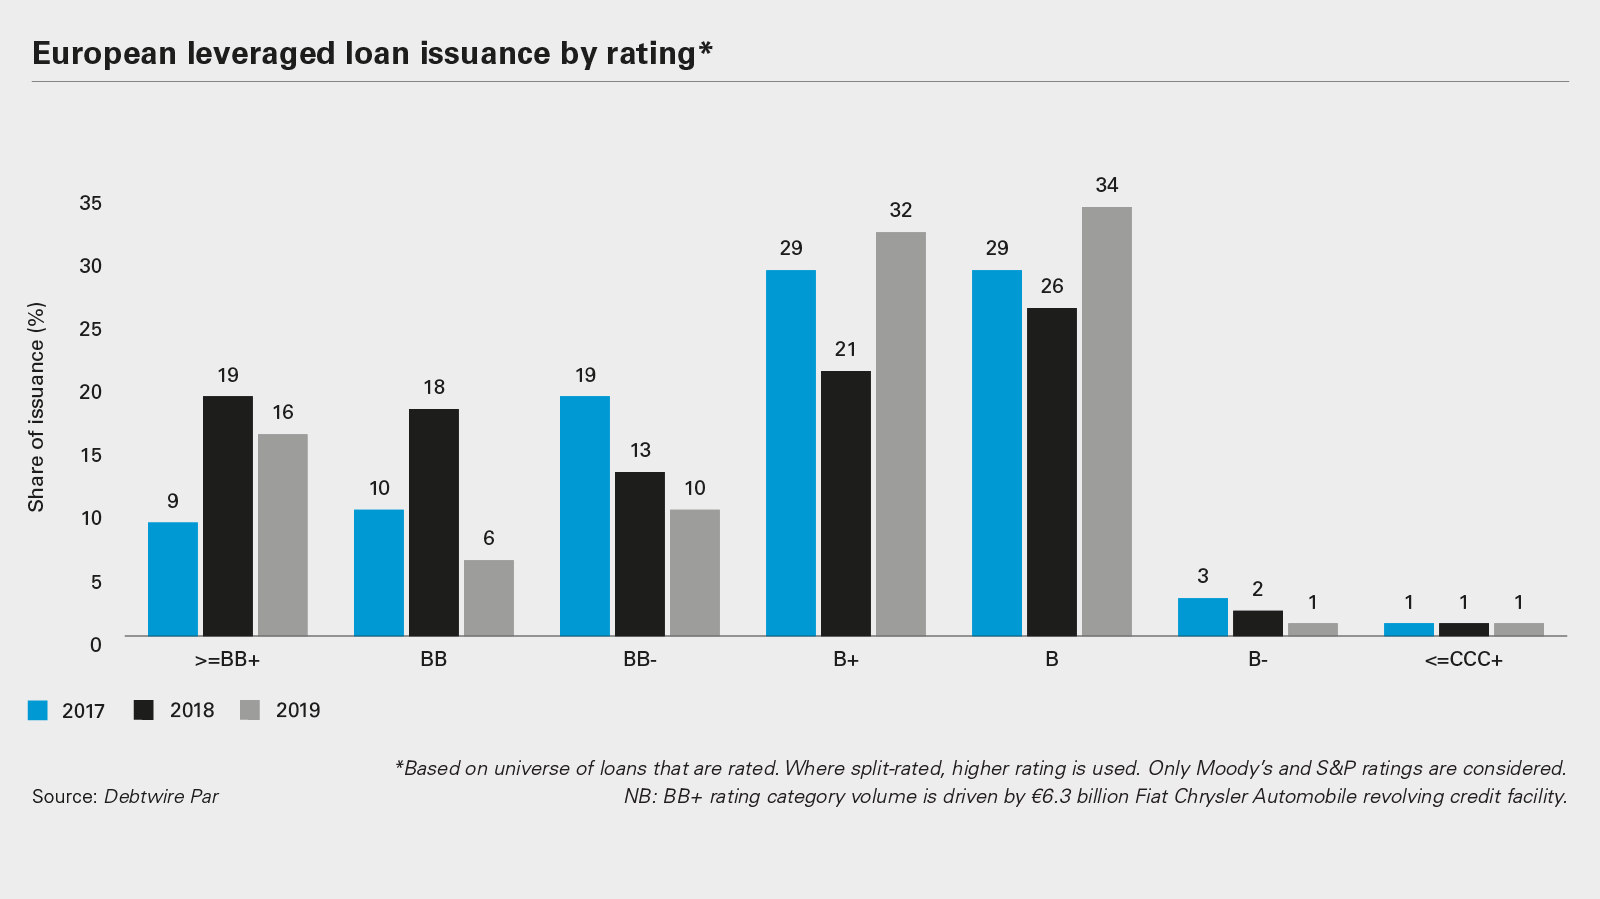 European leveraged loan issuance by rating